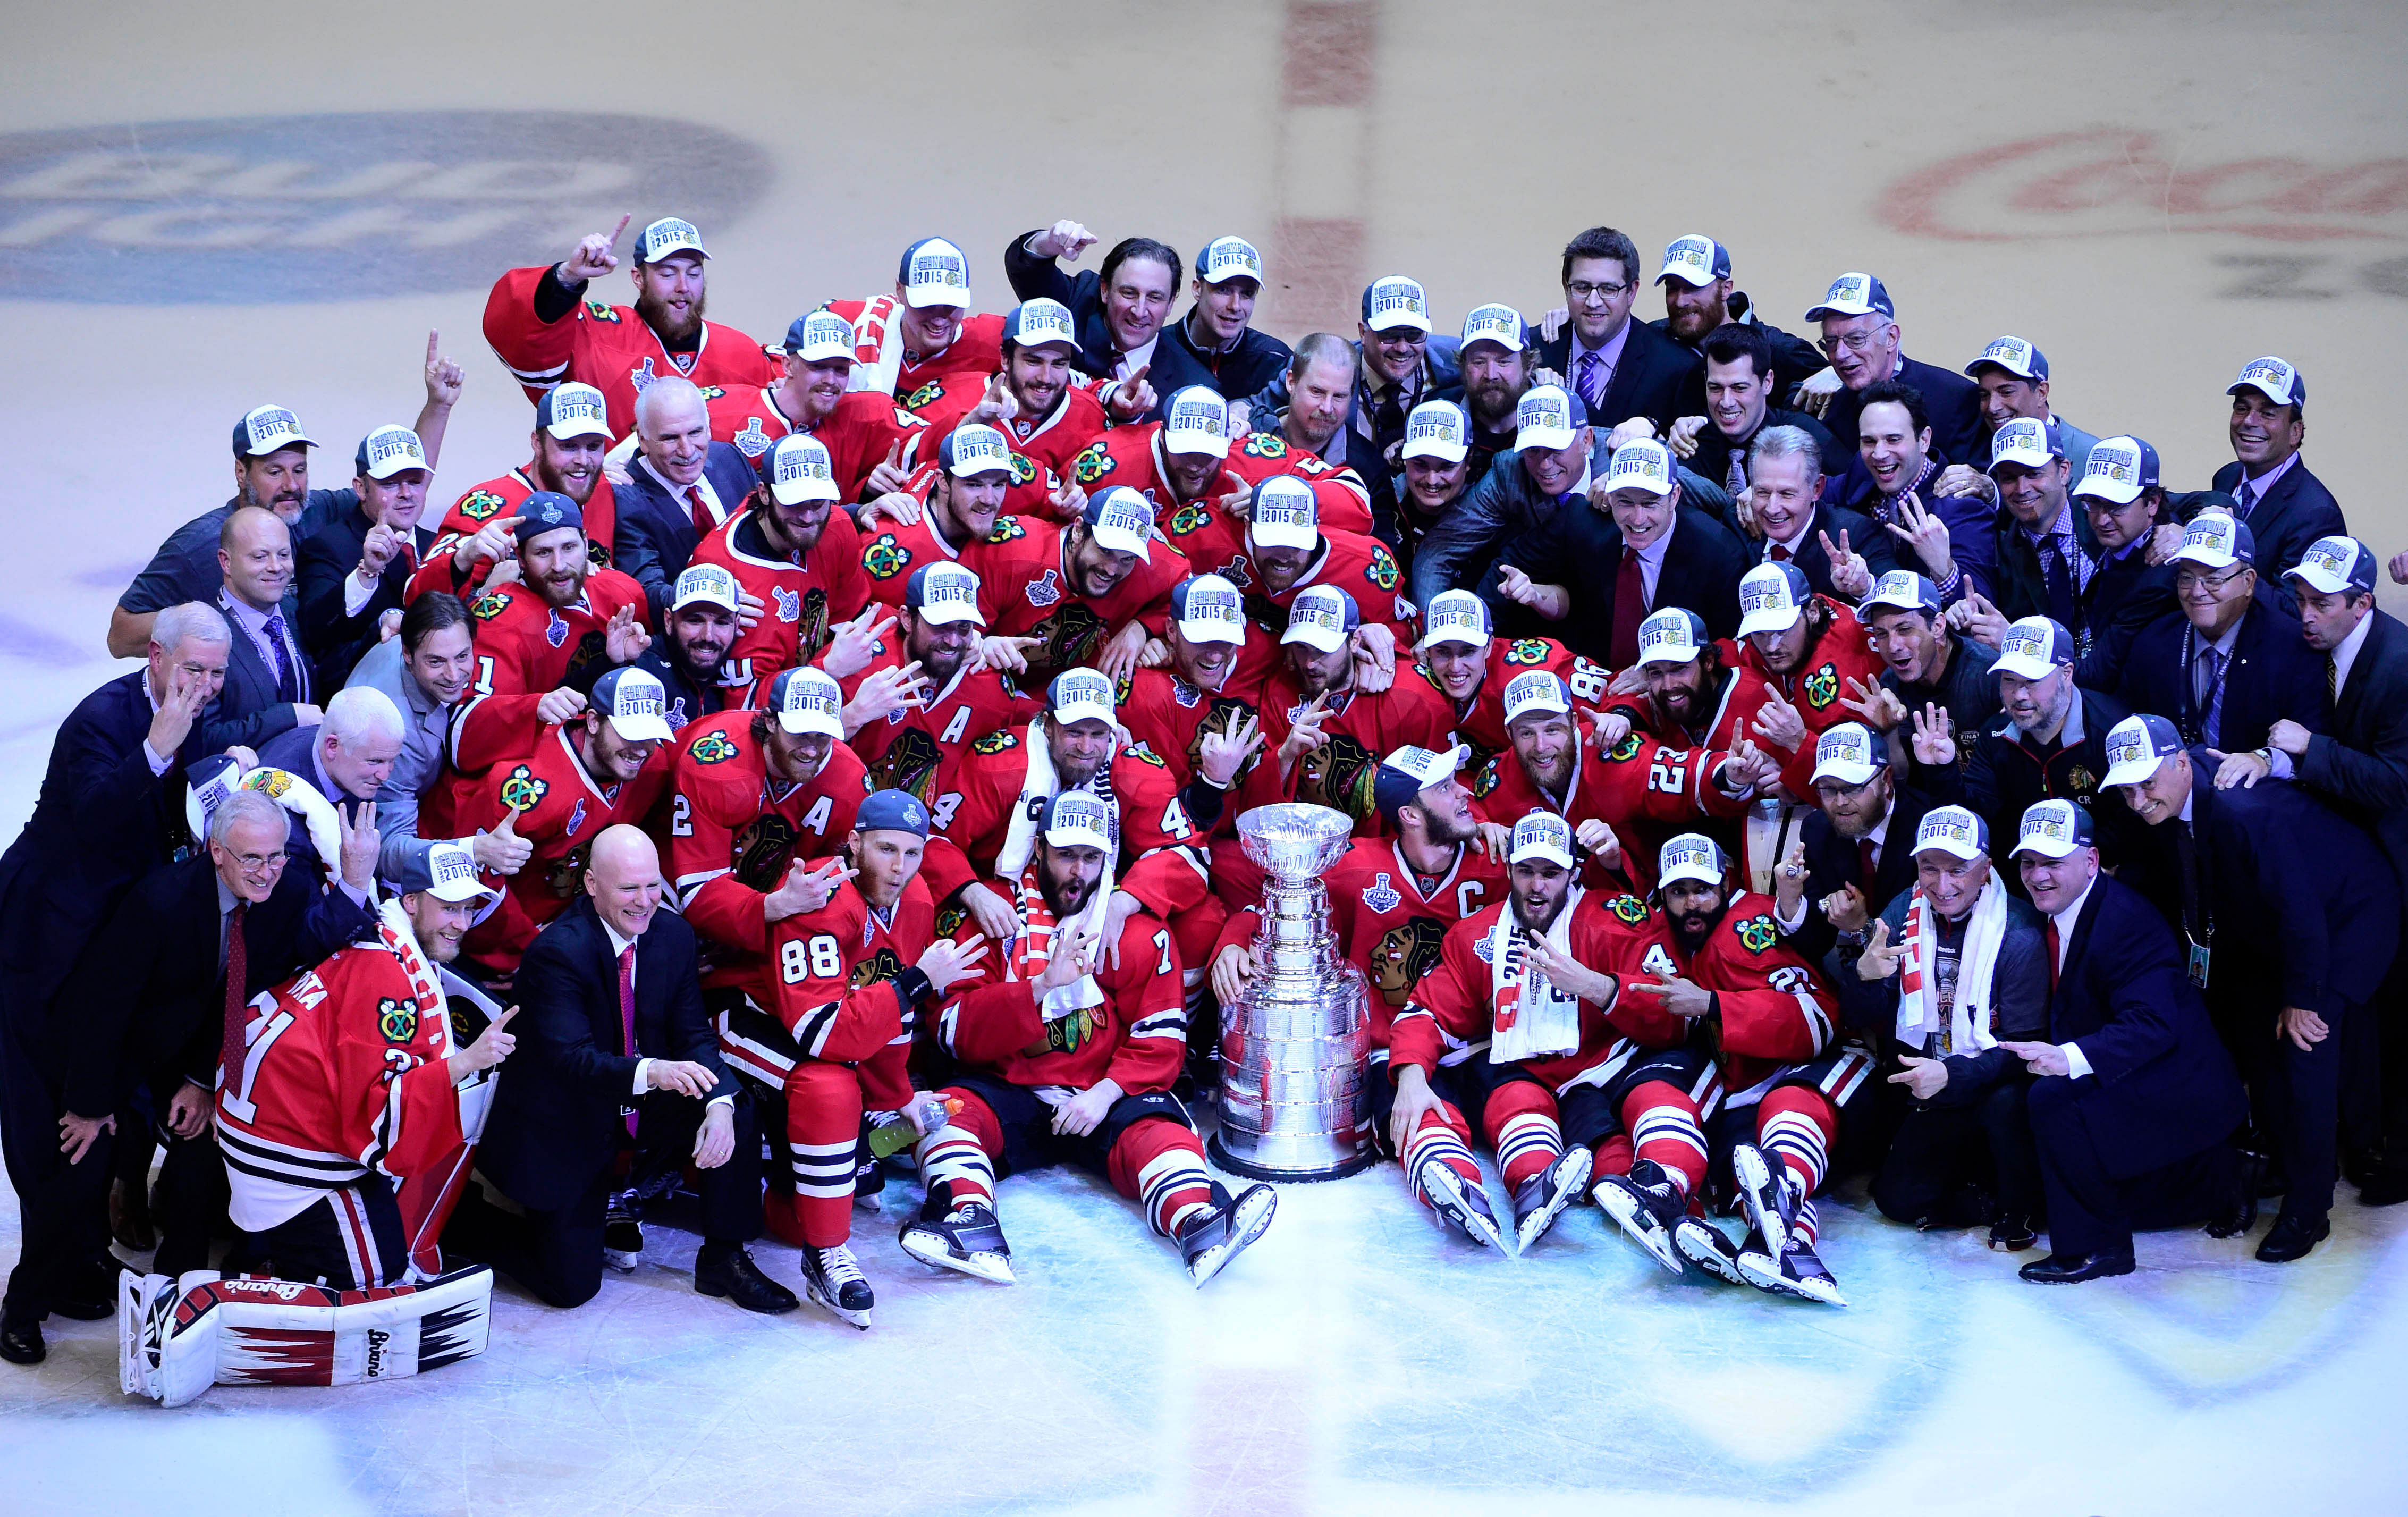 Chicago Blackhawks in 2015, the last Original Six team to win the Stanley Cup